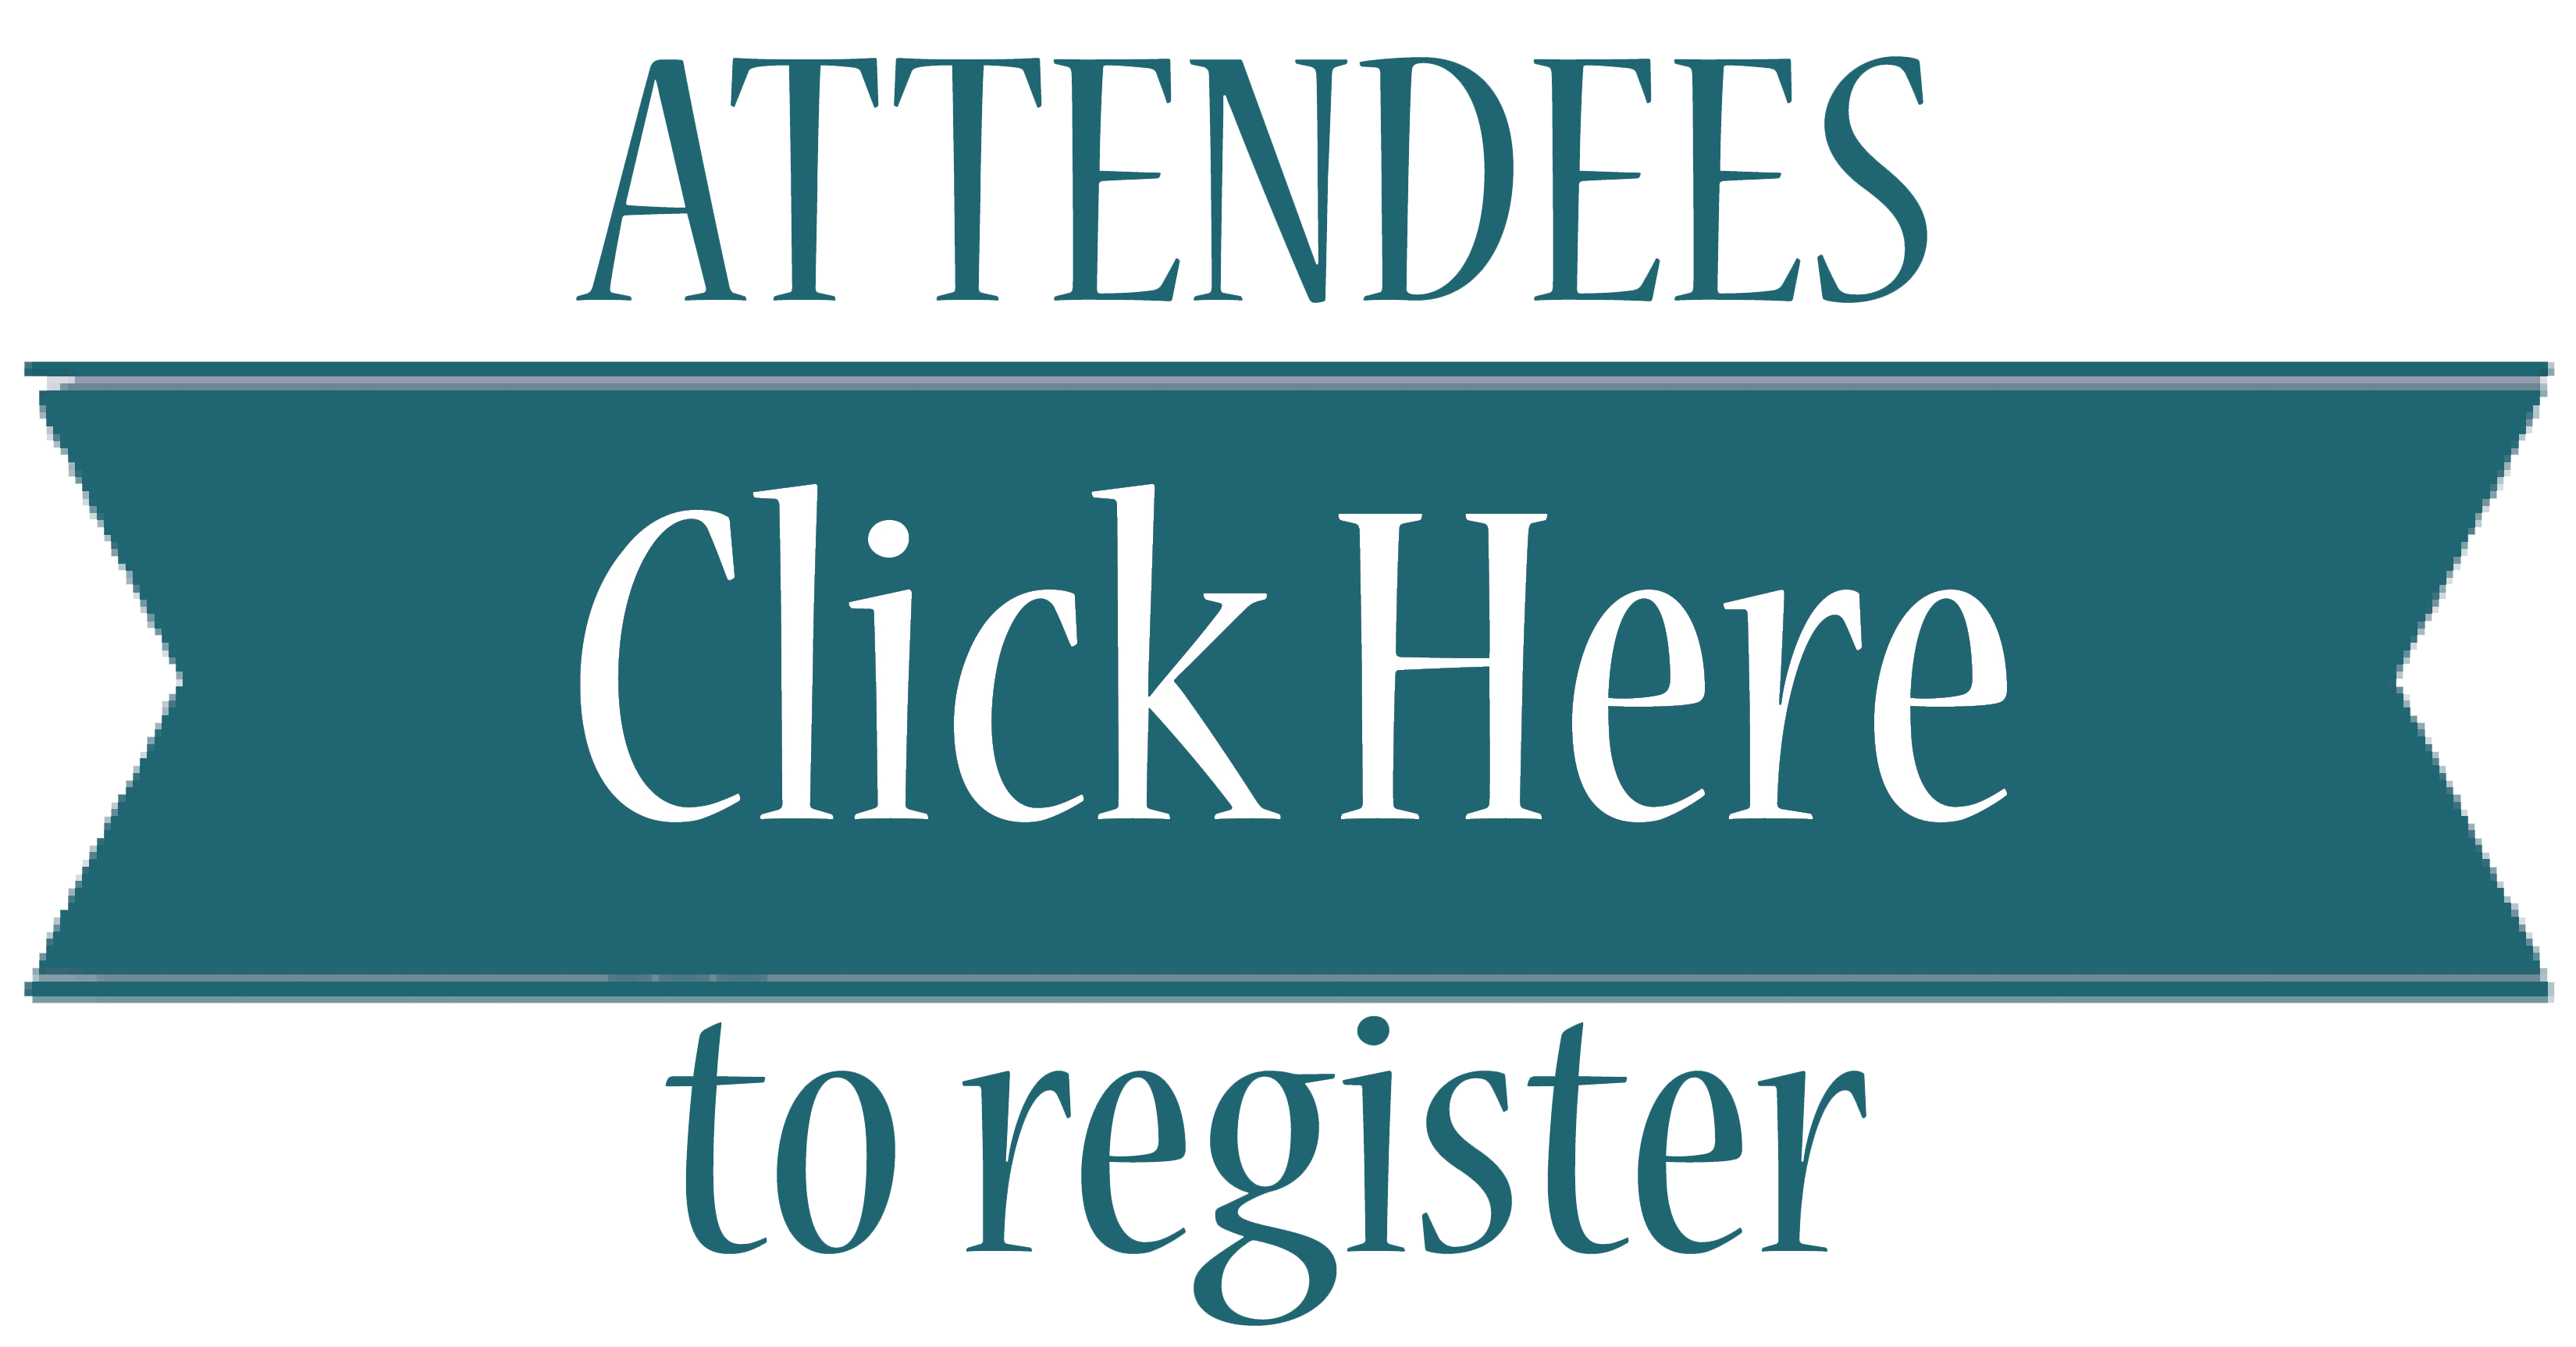 Attendees Click Here to register button